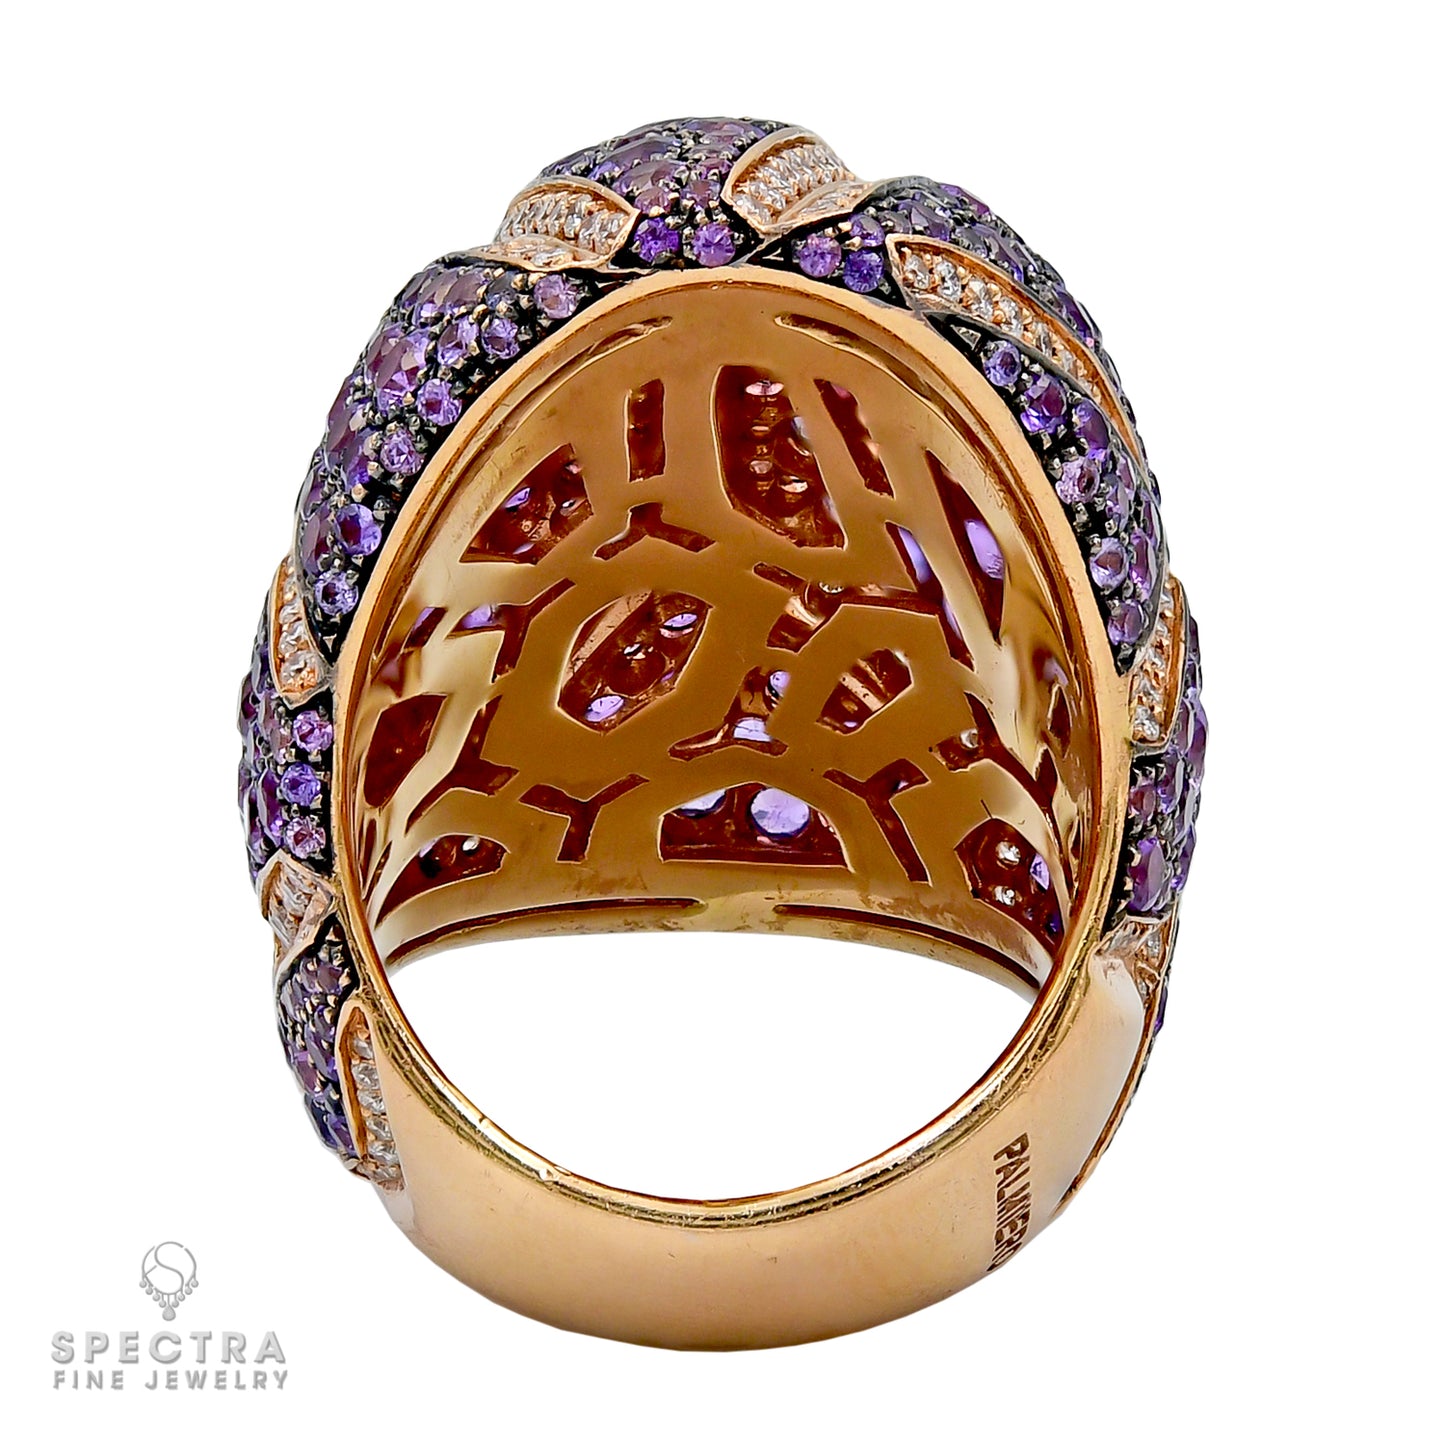 Palmiero Diamond Purple Sapphire Cocktail Ring in 18kt Yellow Gold